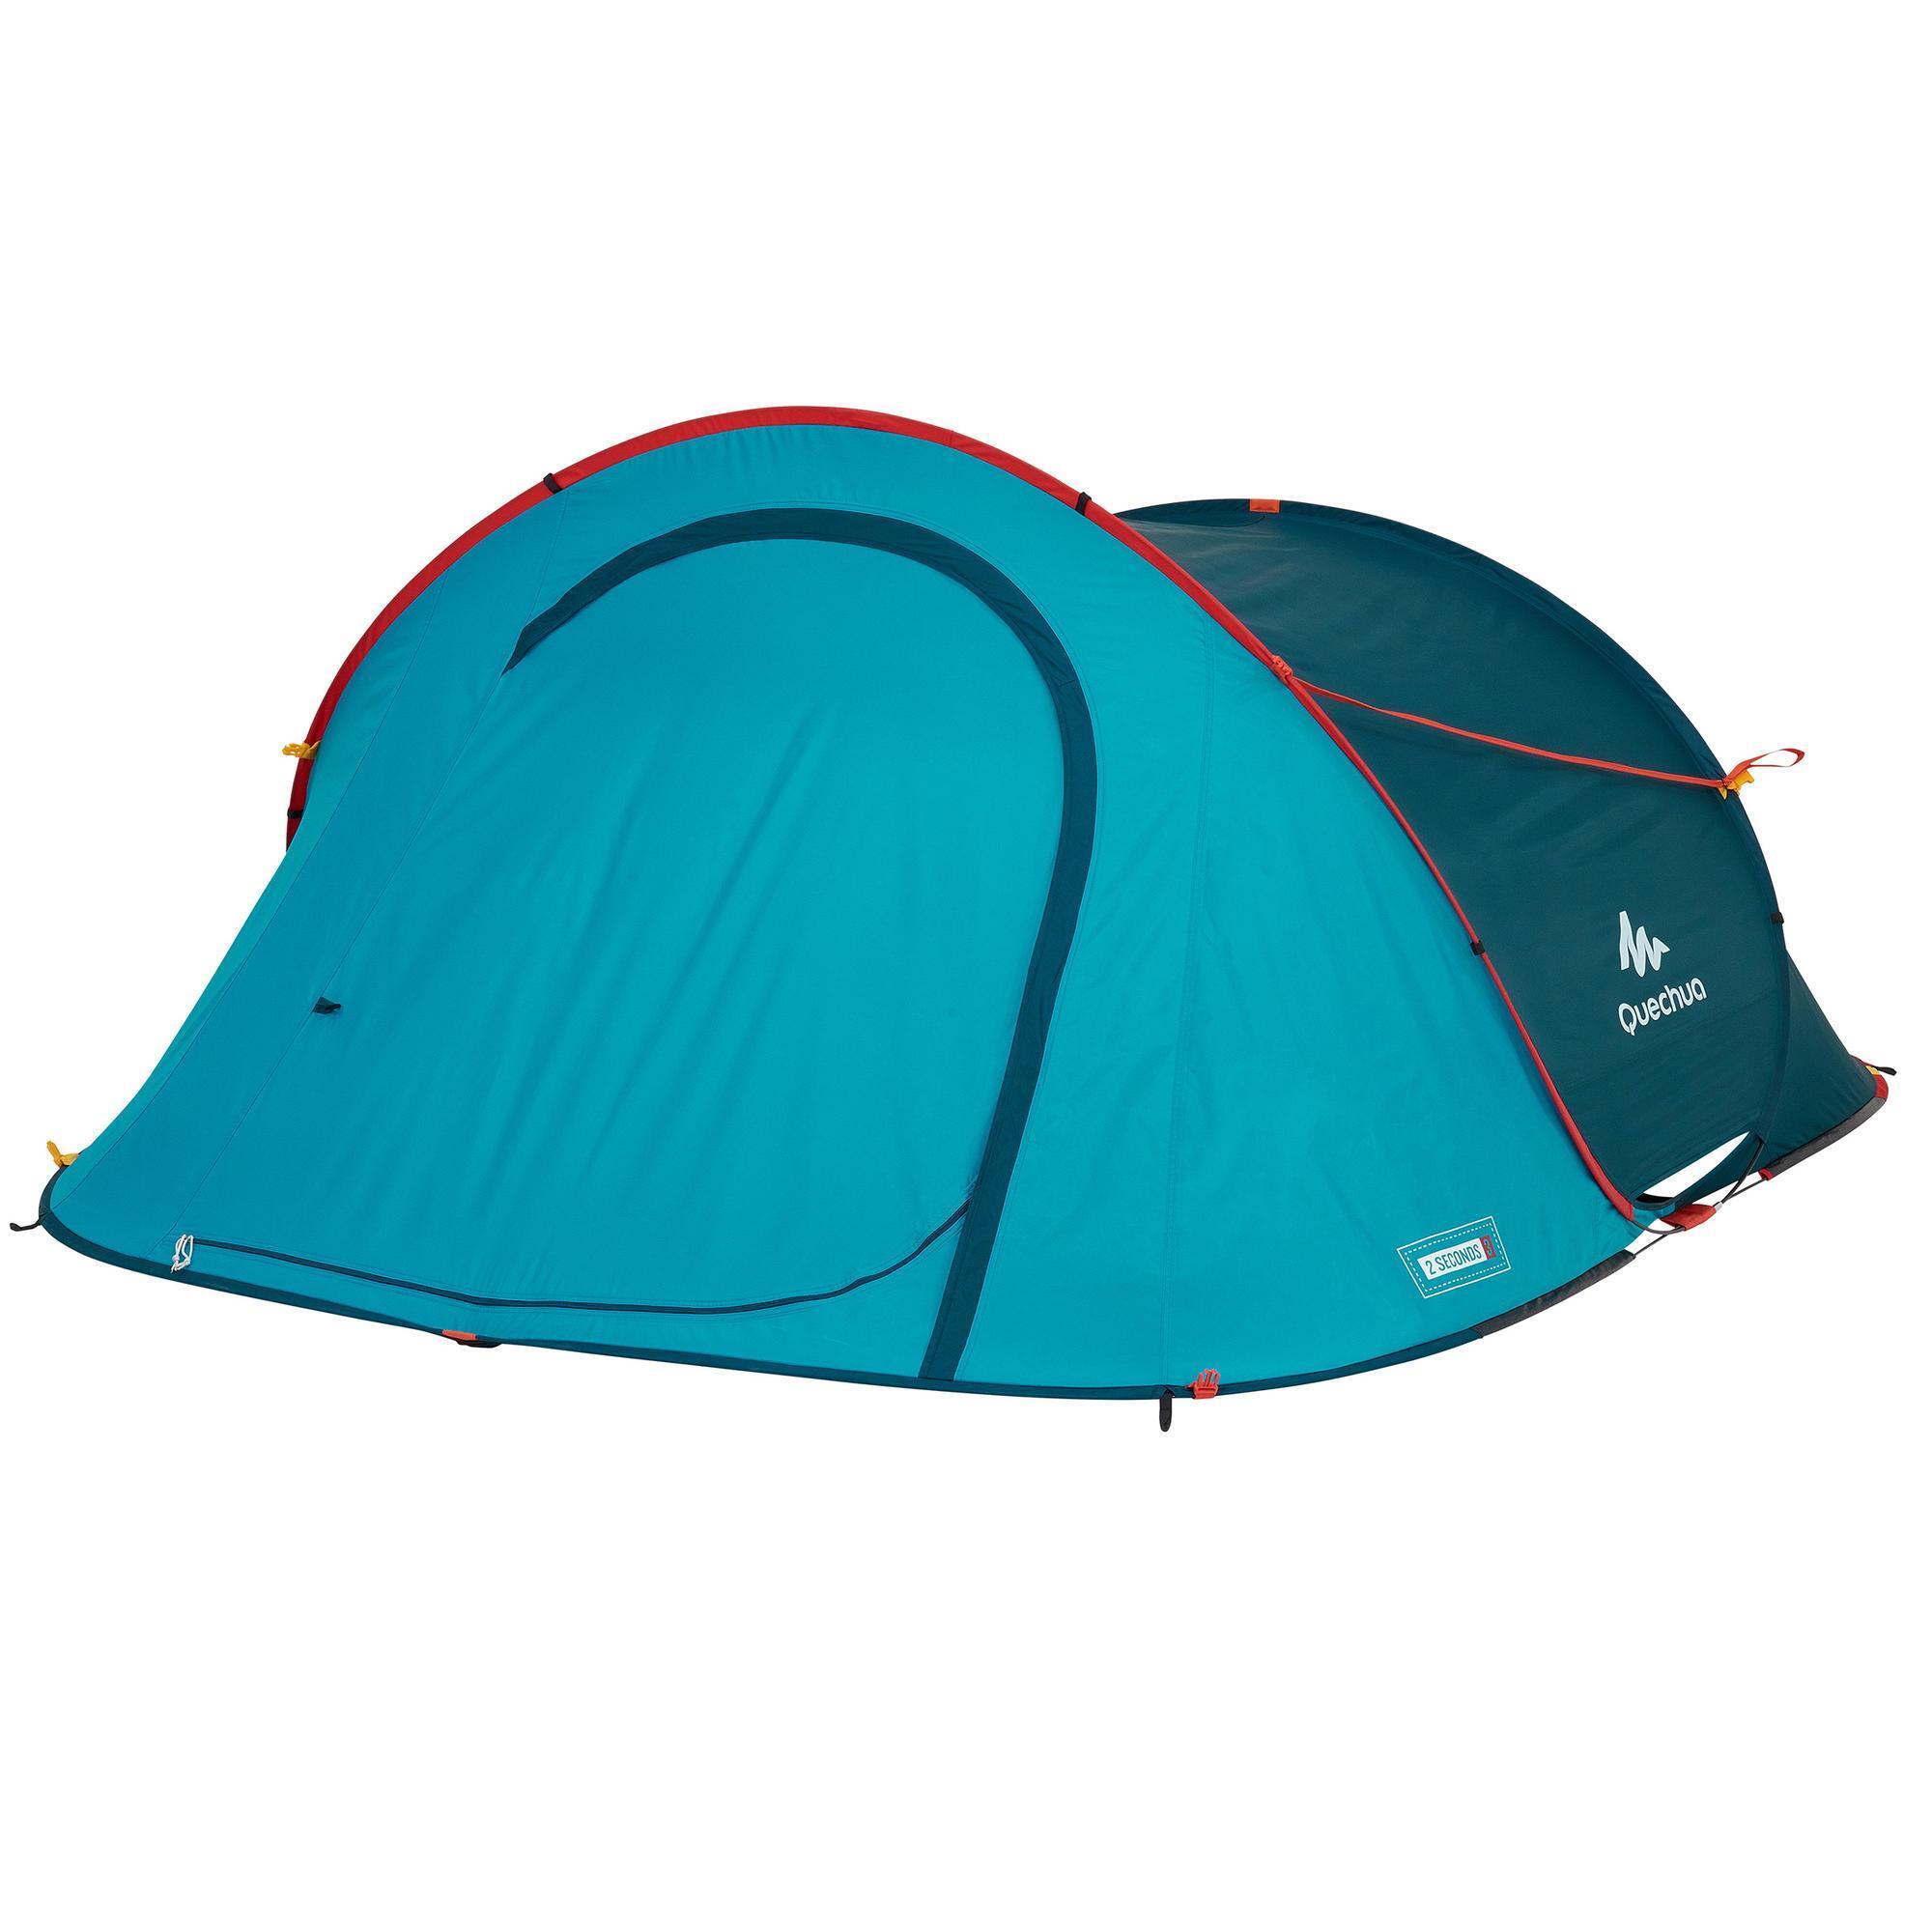 Camping tent - 2 SECONDS - 3-person 24/26